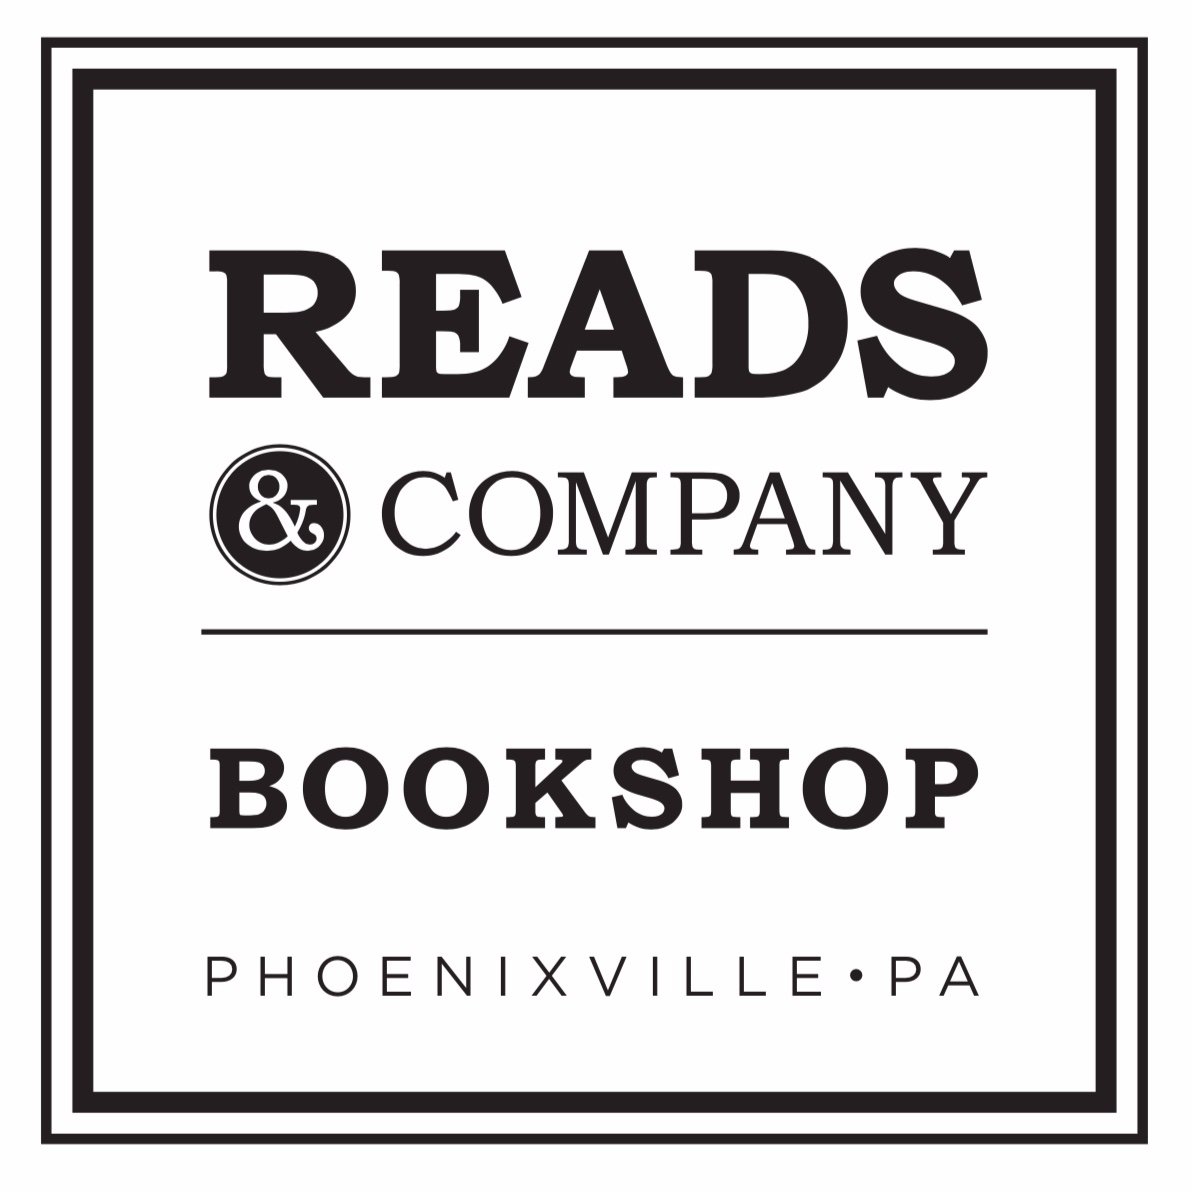 Community-minded independent bookstore at the heart of thriving Phoenixville, PA. 234 Bridge St. We don’t really do Twitter but very active on FB/Instagram